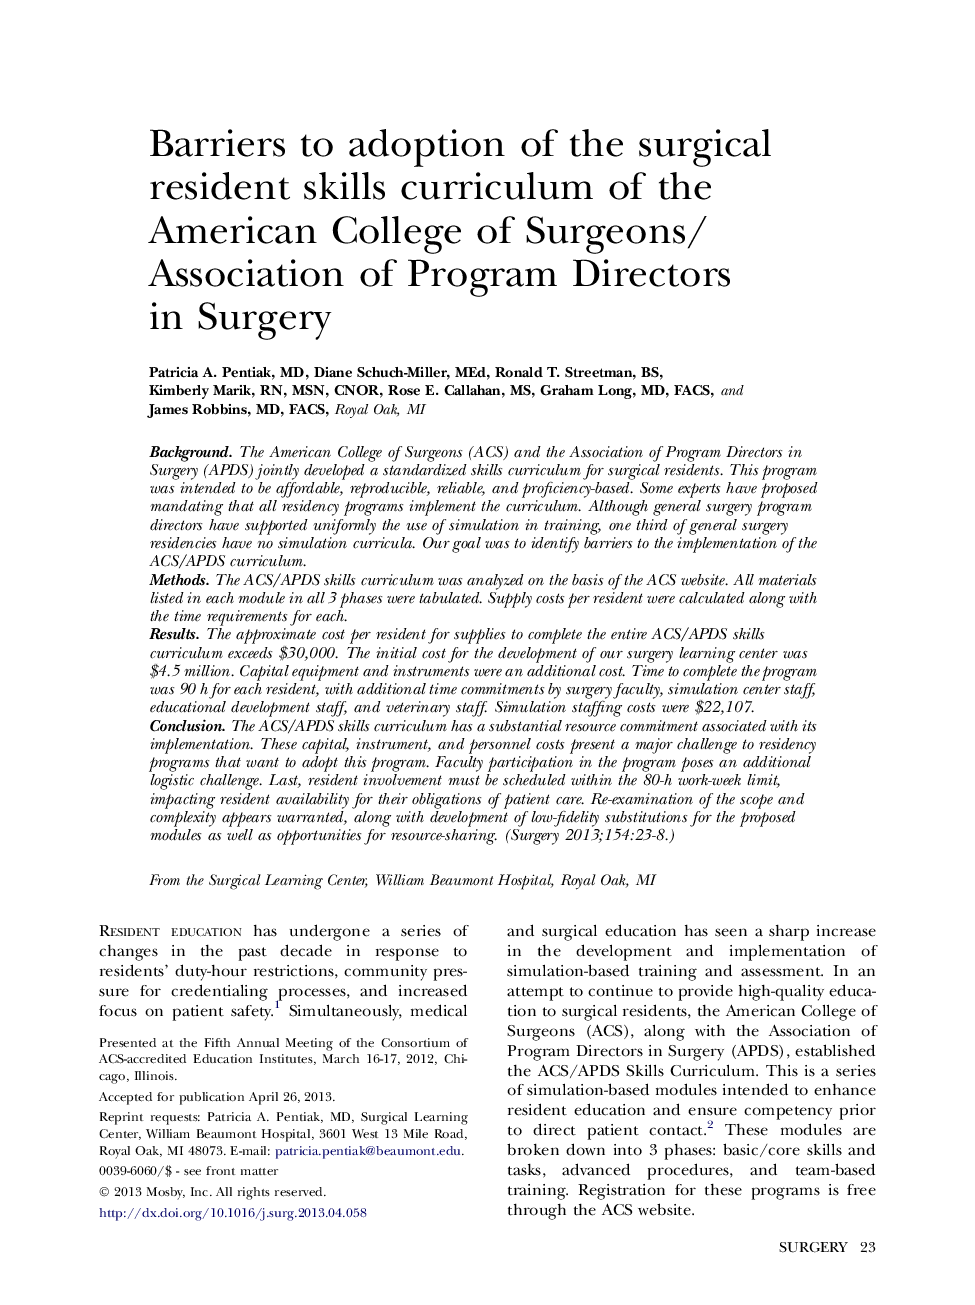 Barriers to adoption of the surgical resident skills curriculum of the American College of Surgeons/Association of Program Directors in Surgery